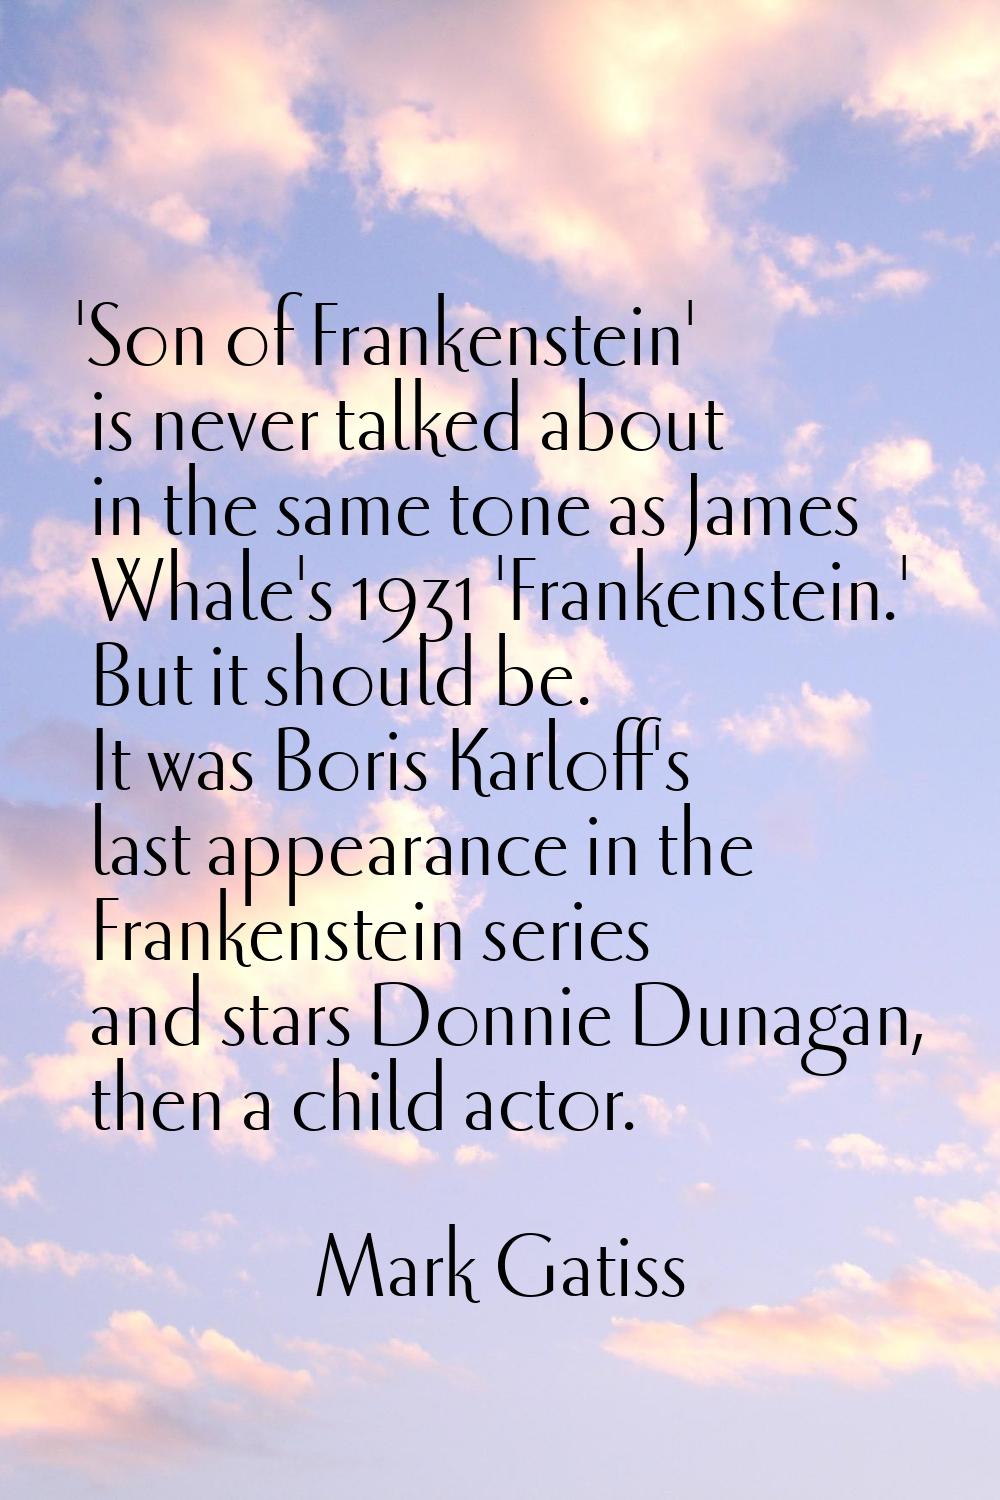 'Son of Frankenstein' is never talked about in the same tone as James Whale's 1931 'Frankenstein.' 